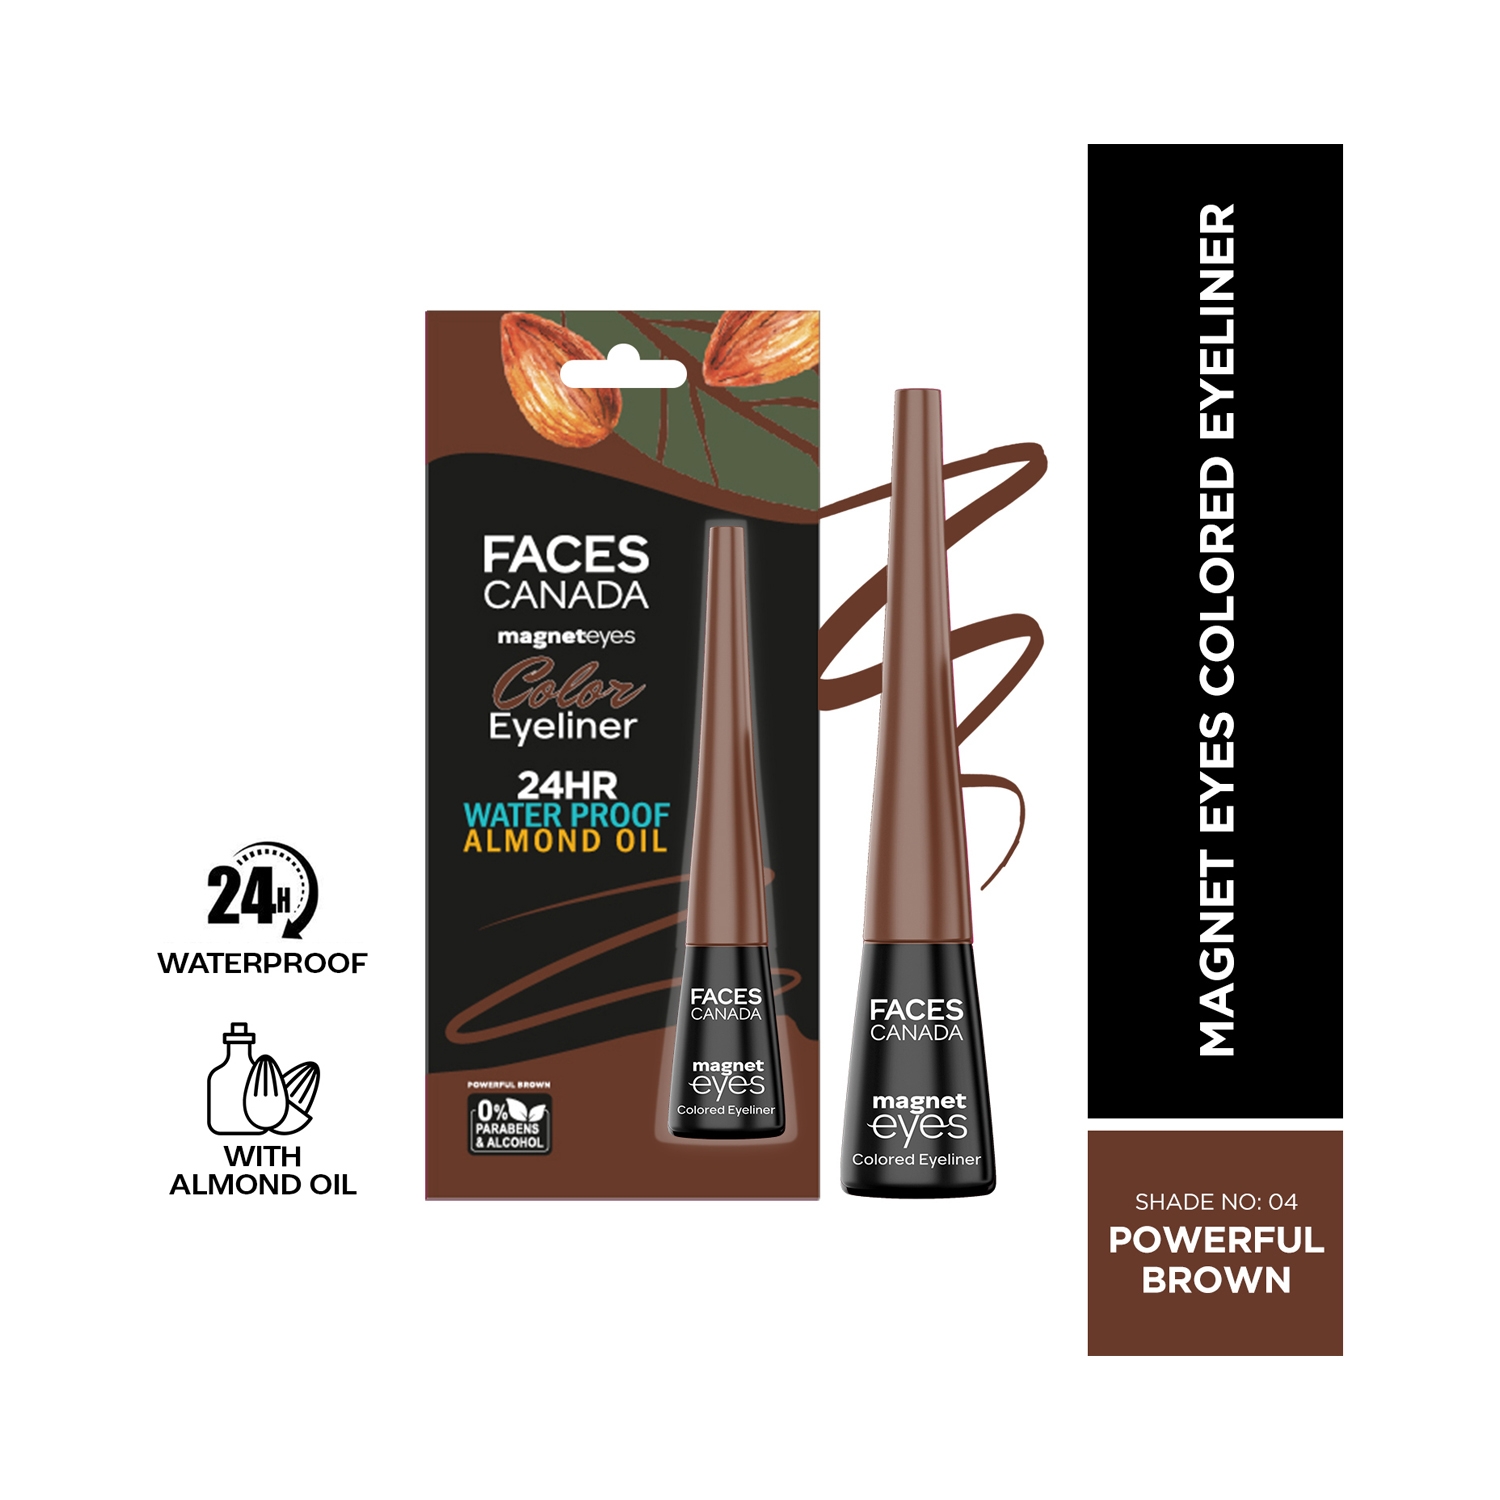 Faces Canada | Faces Canada Magneteyes Colored Eyeliner - 04 Powerful Brown (4ml)